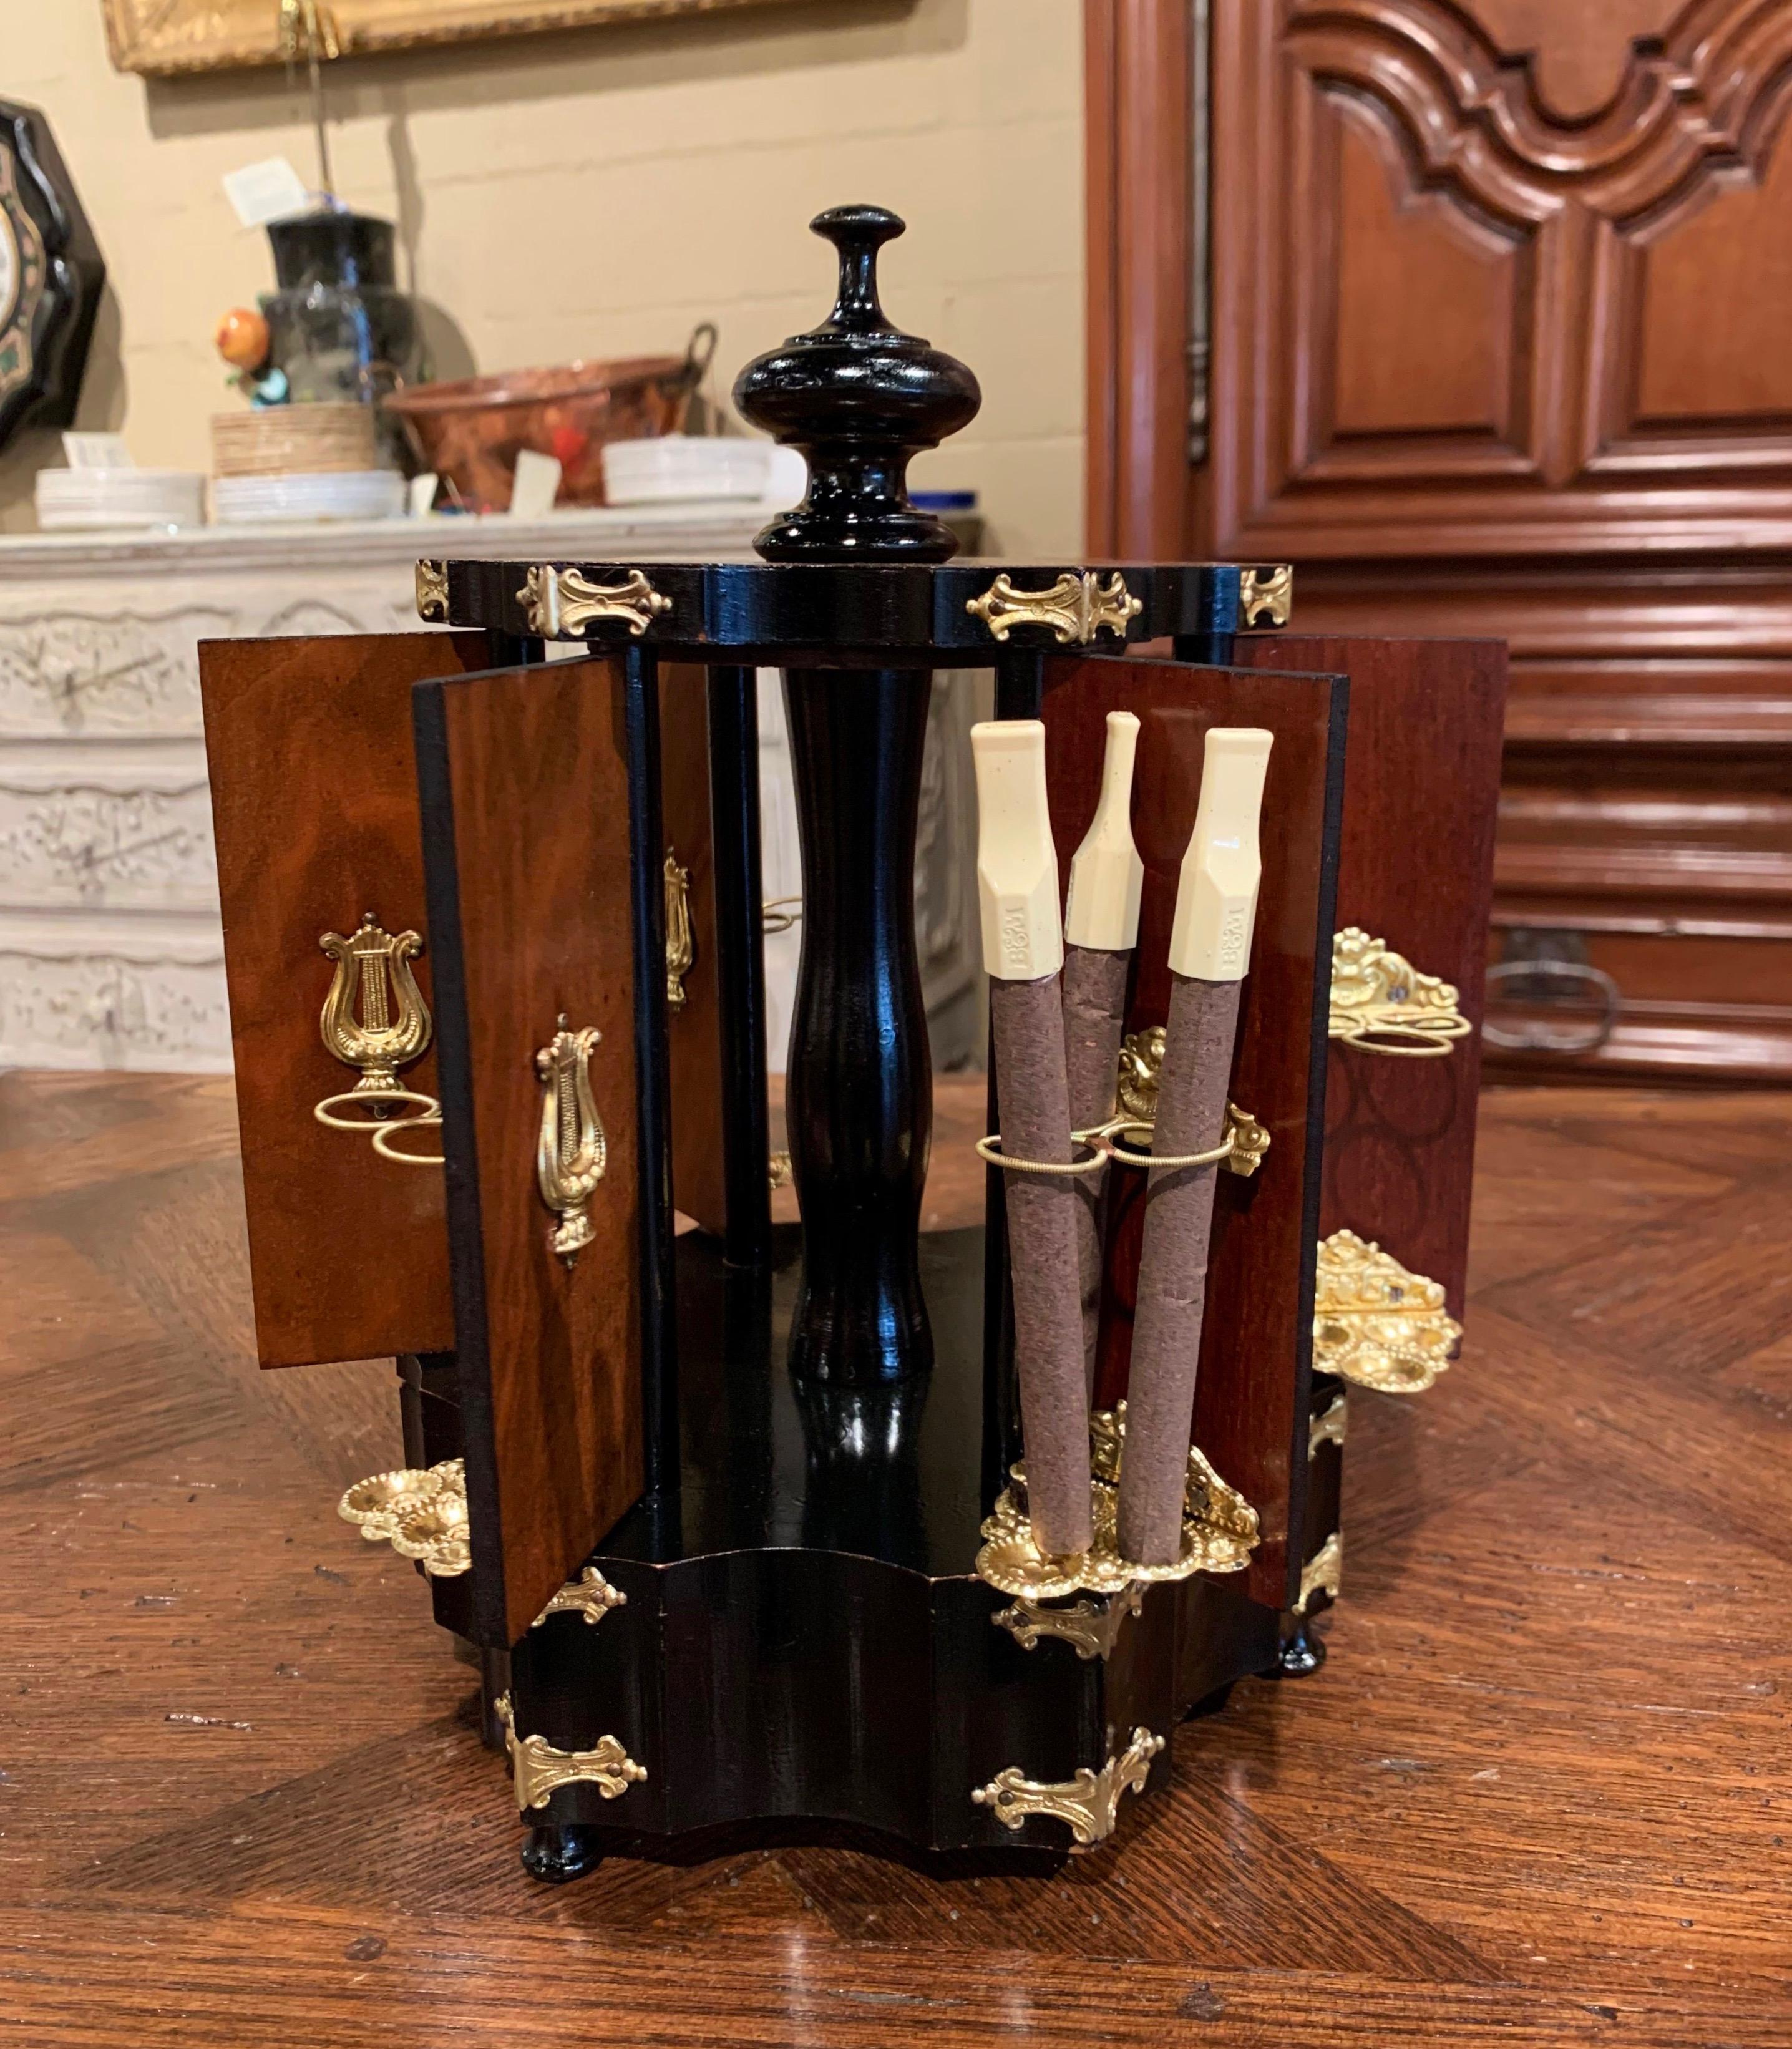 This elegant antique two-tone fruitwood box was crafted in France, circa 1870; the twelve-cigar holder stands on small bun feet, and features a top finial knob with rotating open and close mechanism when twisting the knob. The outside of all six